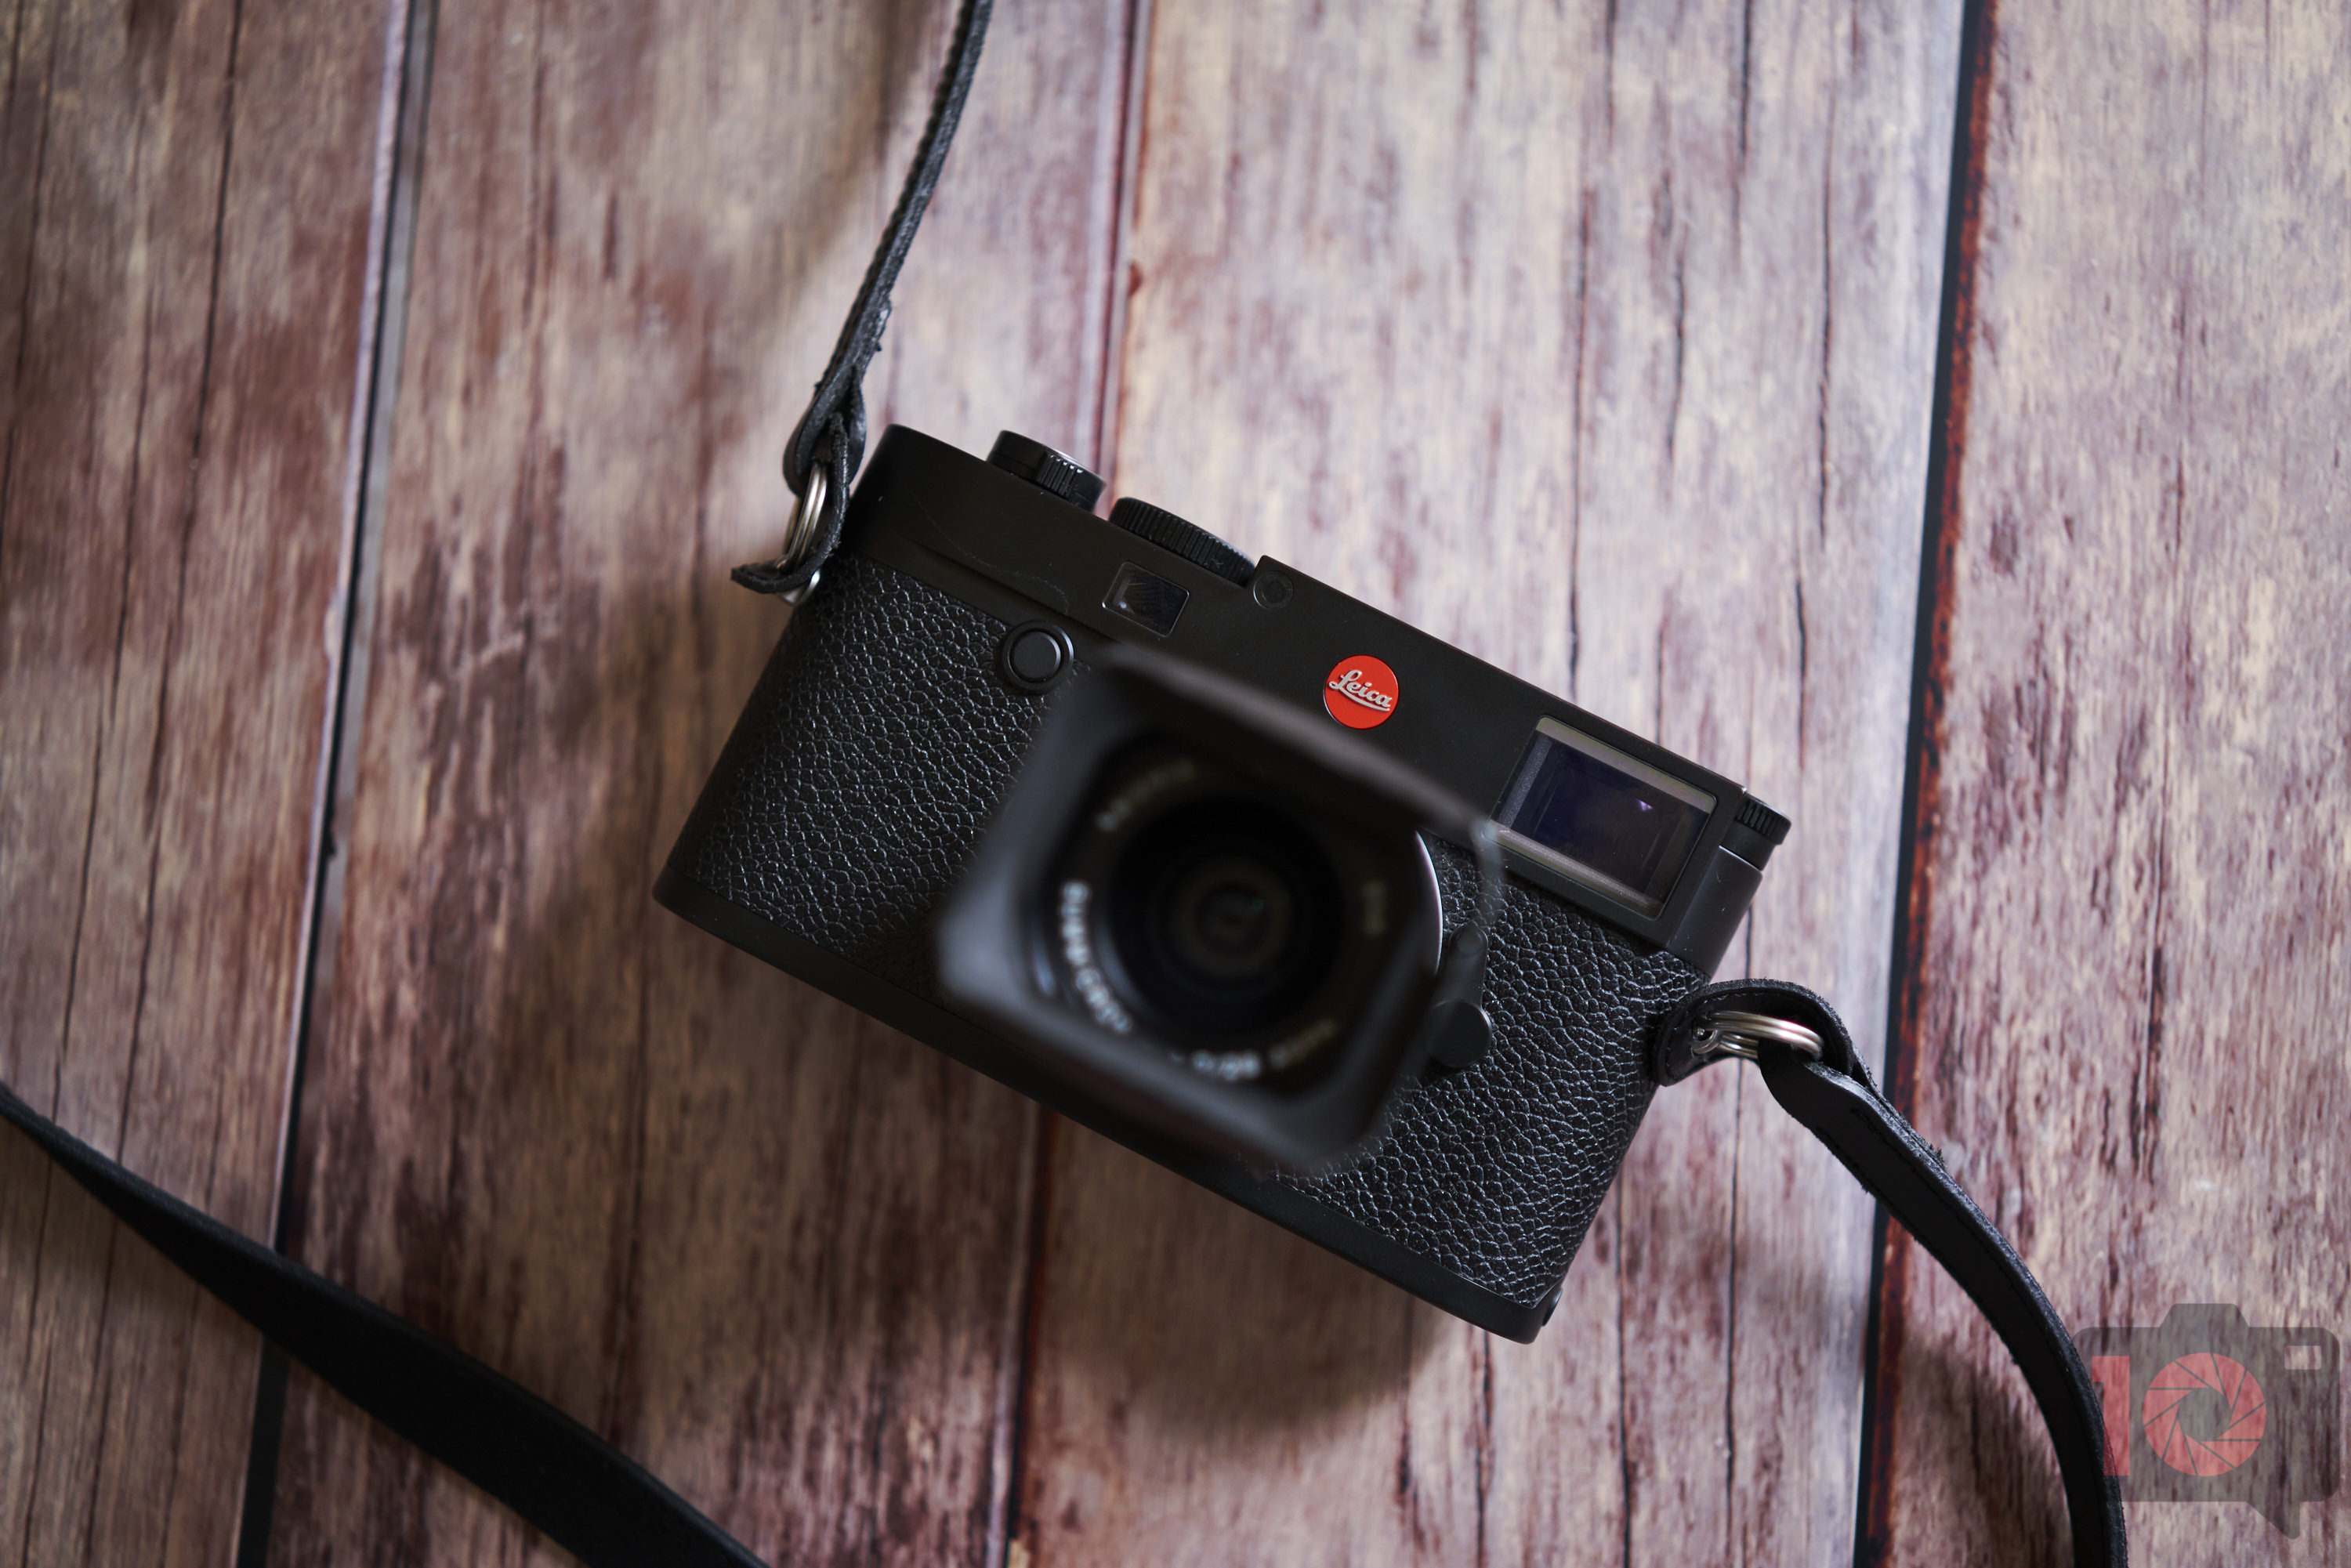 Chris Gampat The Phoblographer Leica M10R review product images 1.81-80s400 1